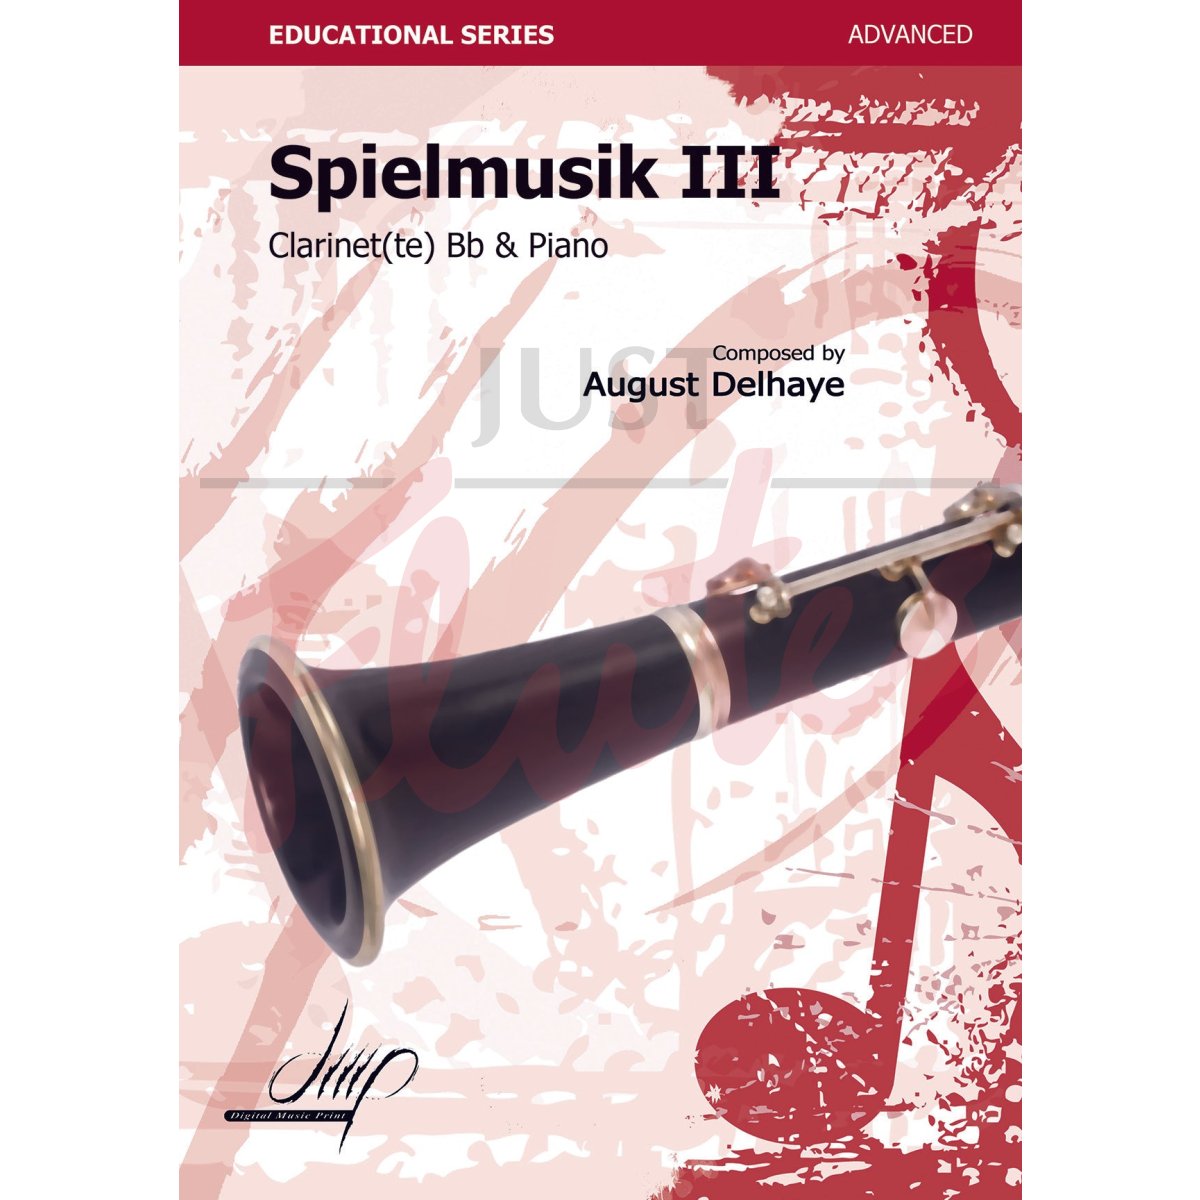 Spielmusik III for Clarinet and Piano